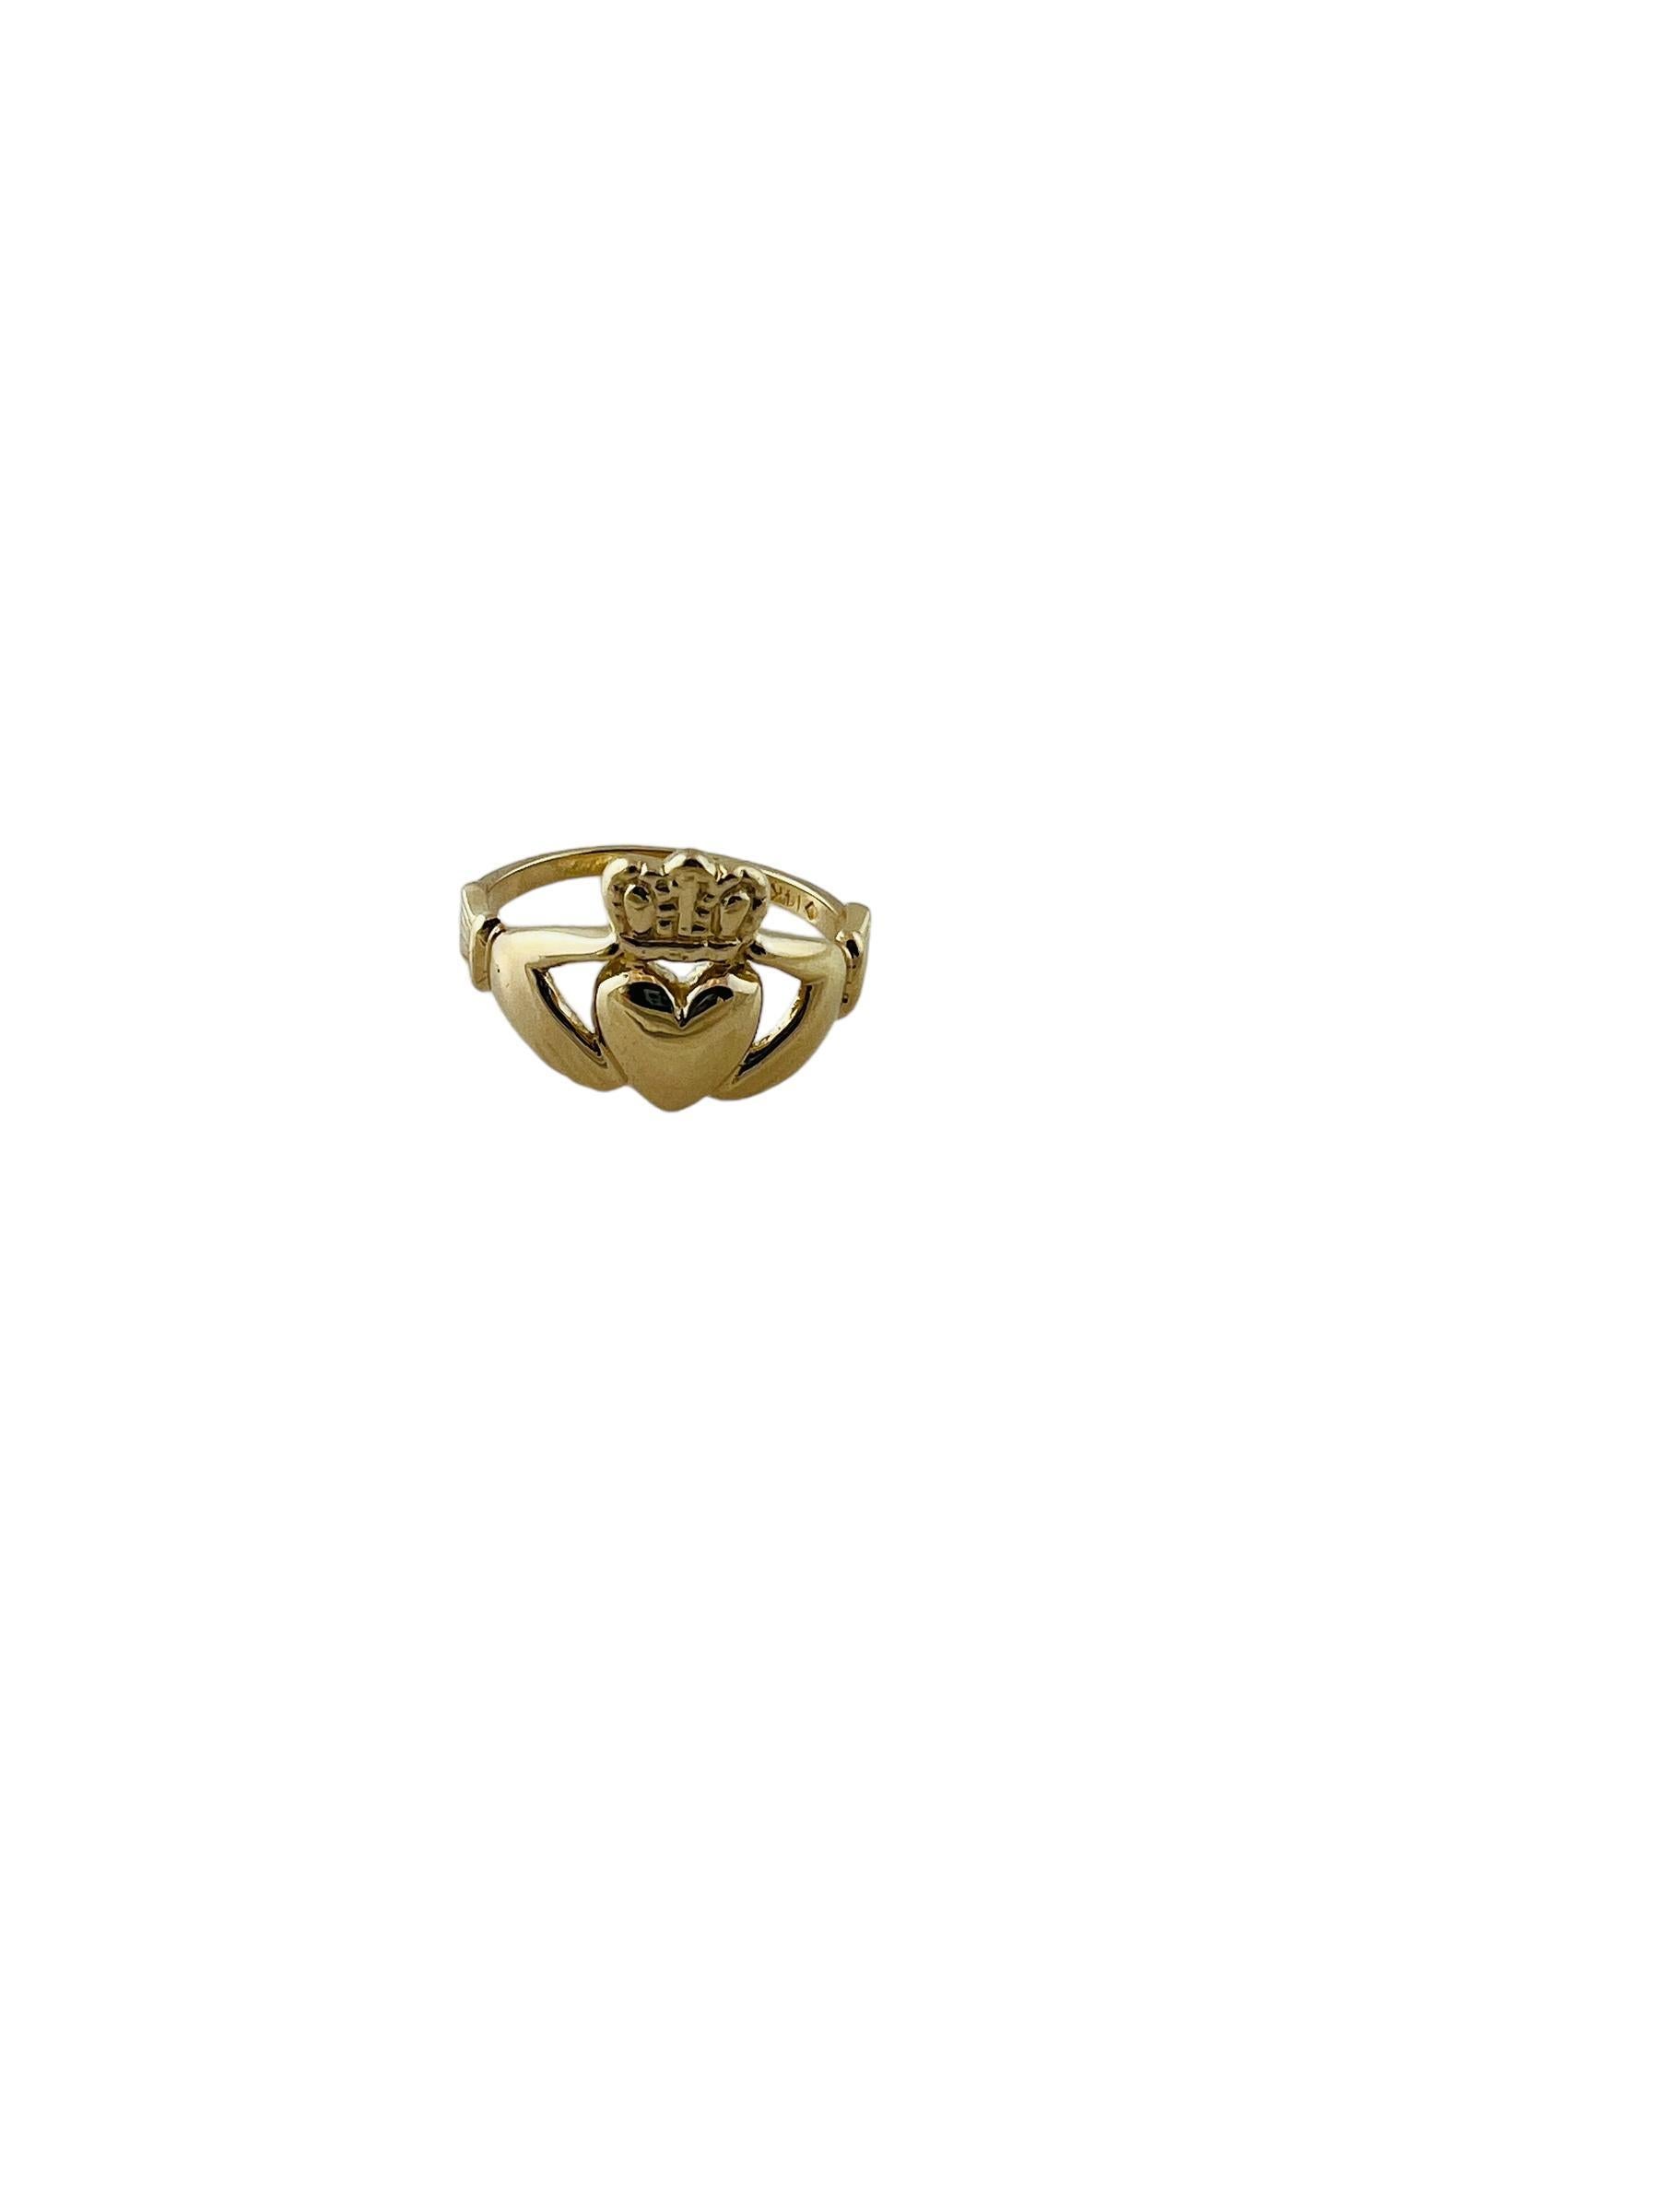 claddagh ring direction